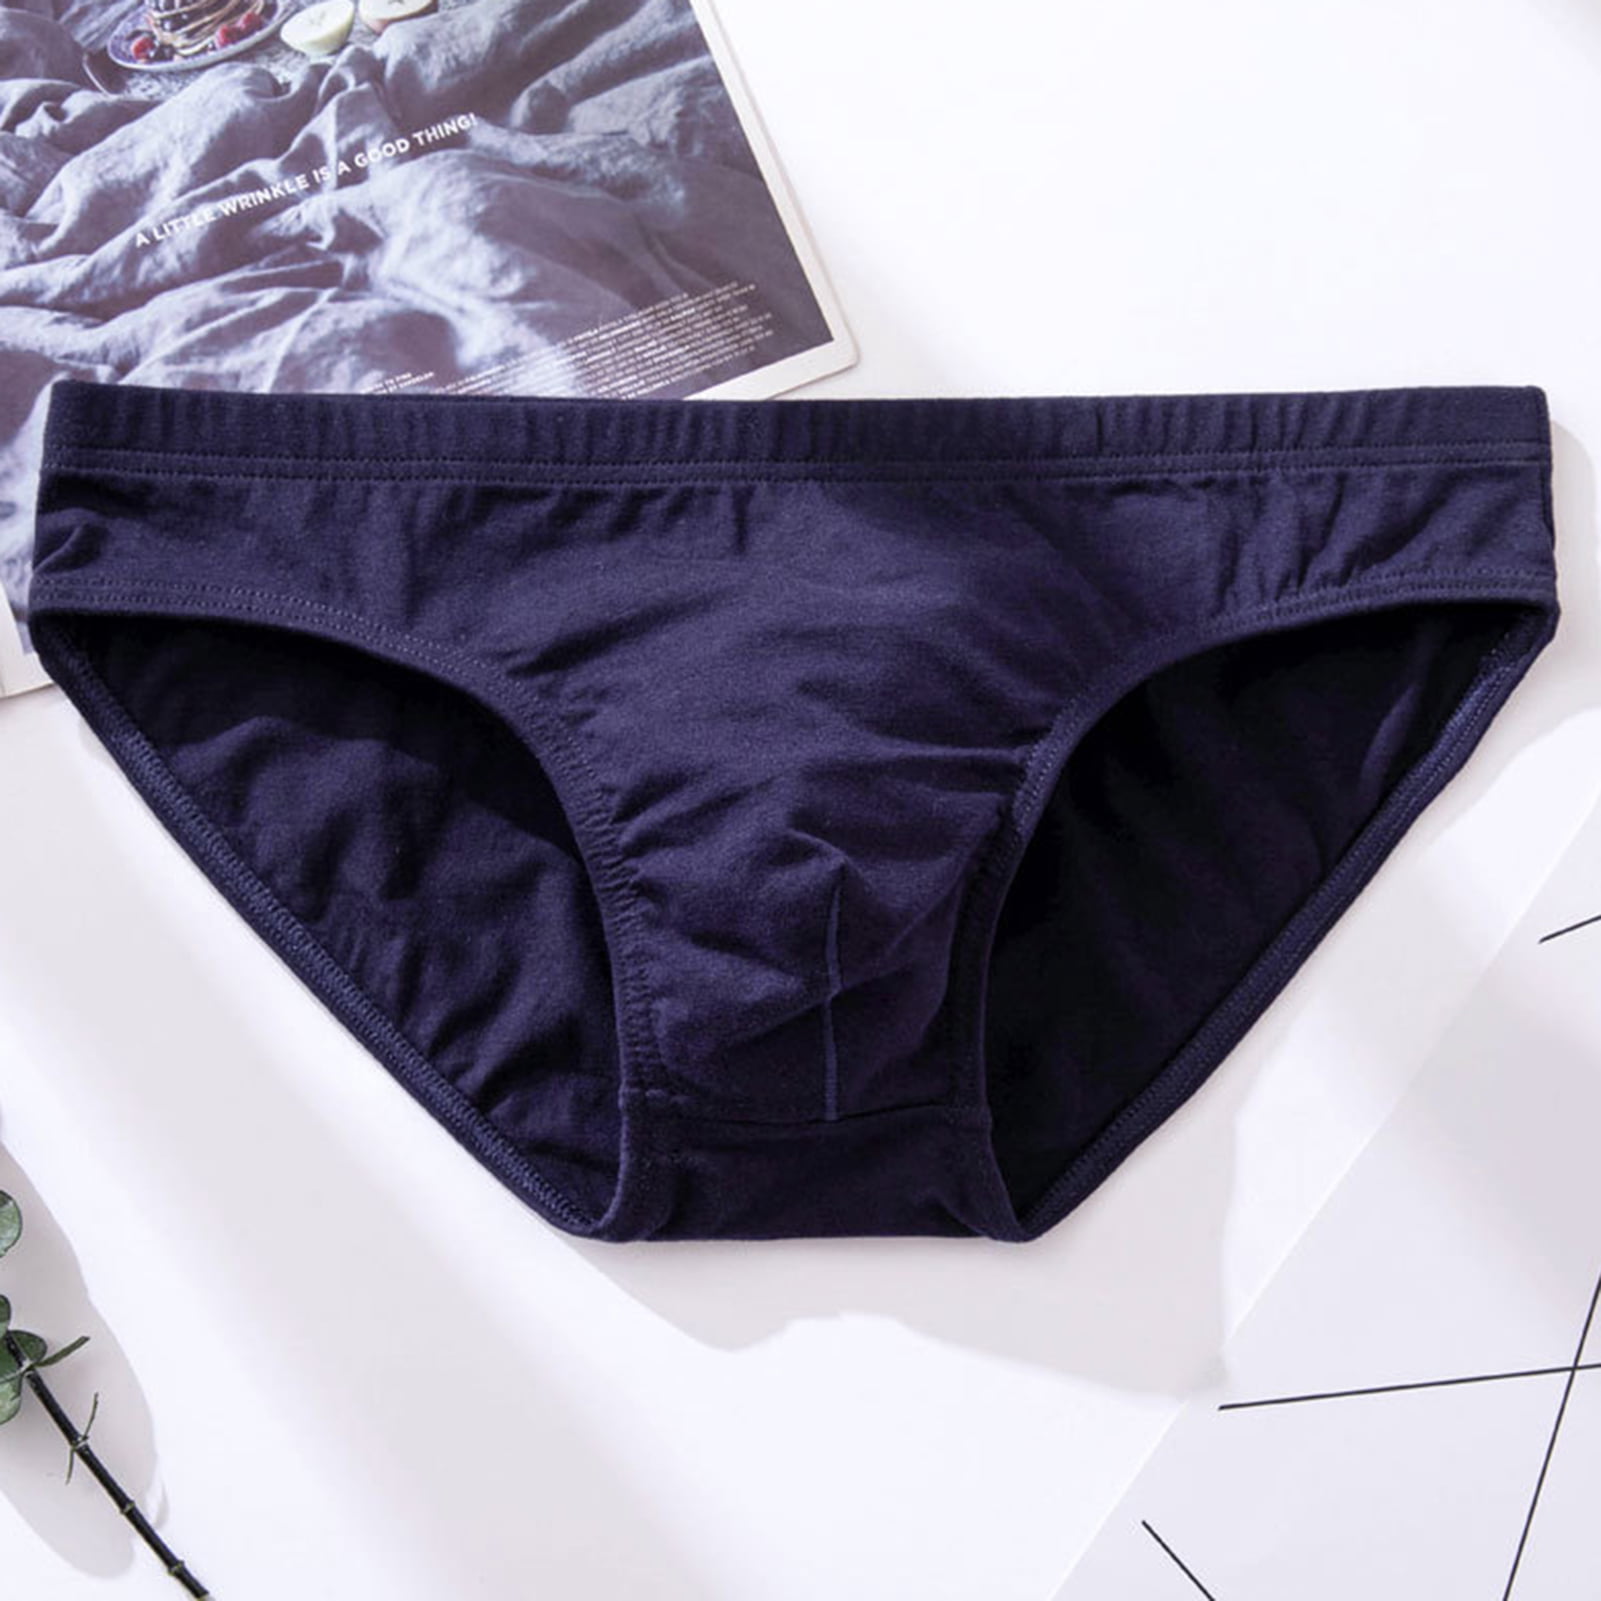 harmtty Trendy Male Underwear Thin for Daily Life Moisture Wicking